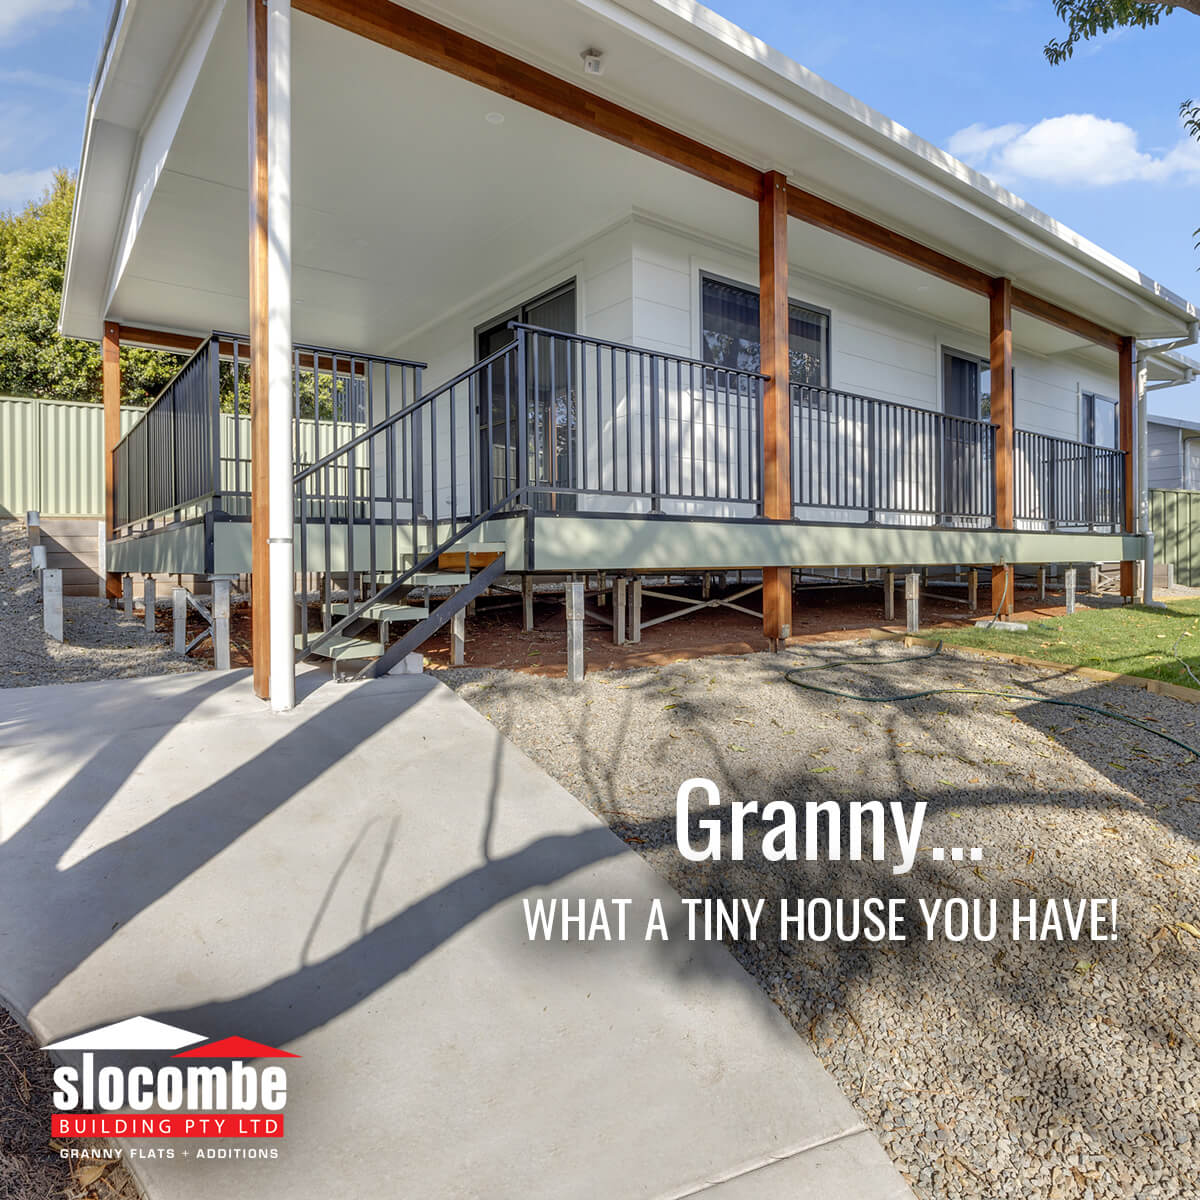 Granny...what a tiny house you have! Built by Slocombe Building Pty Ltd